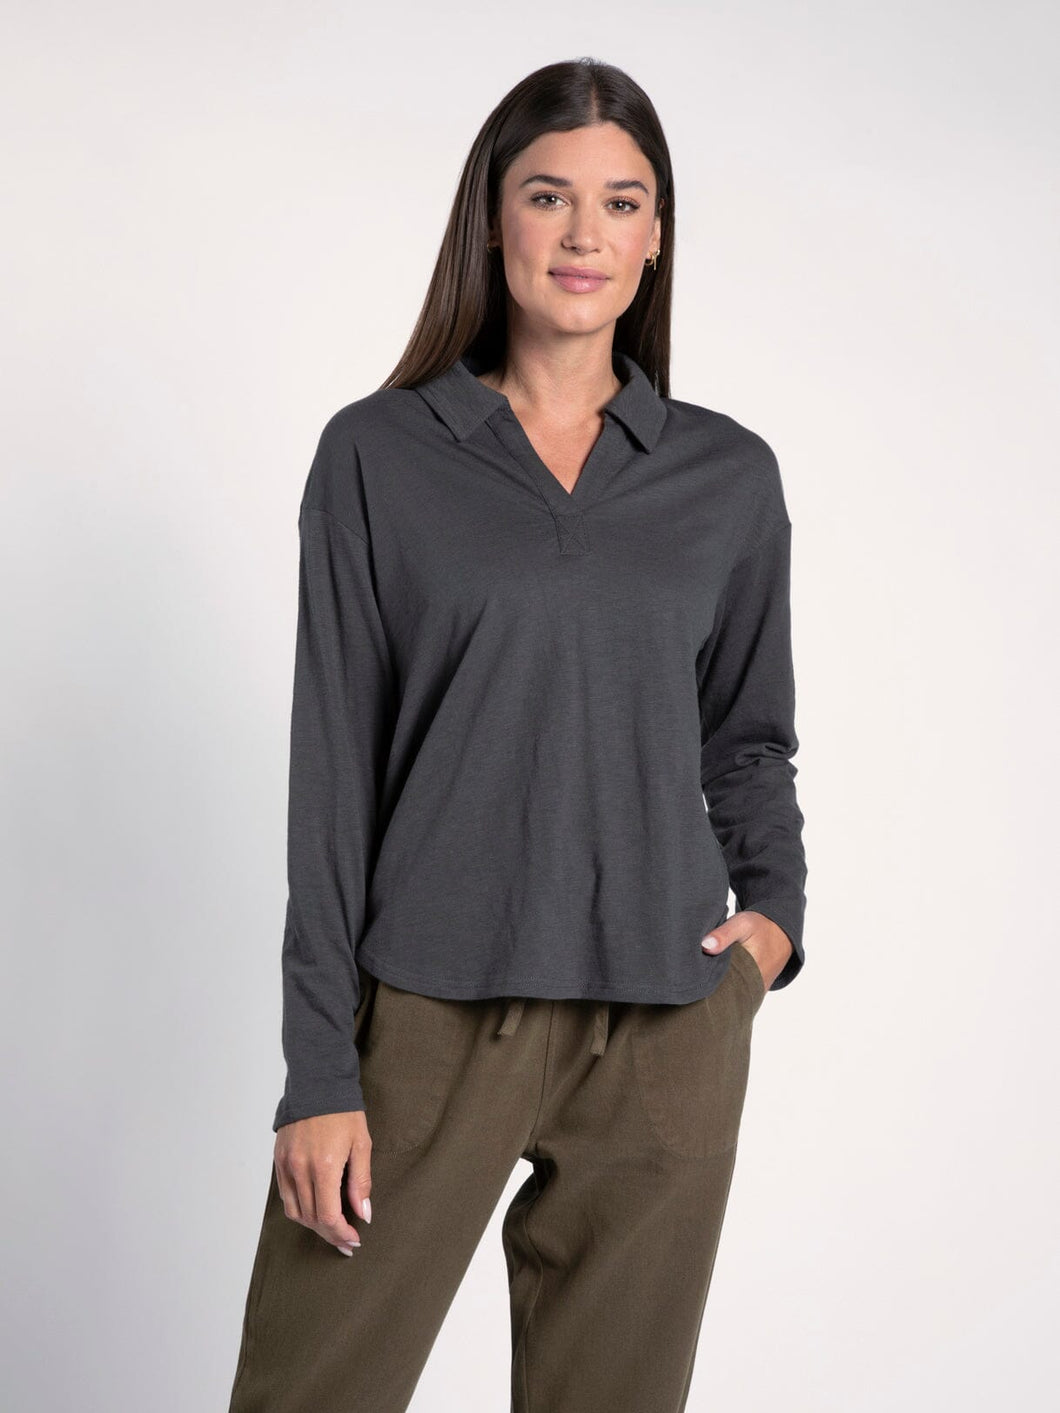 Quinley Black Olive Collared Top